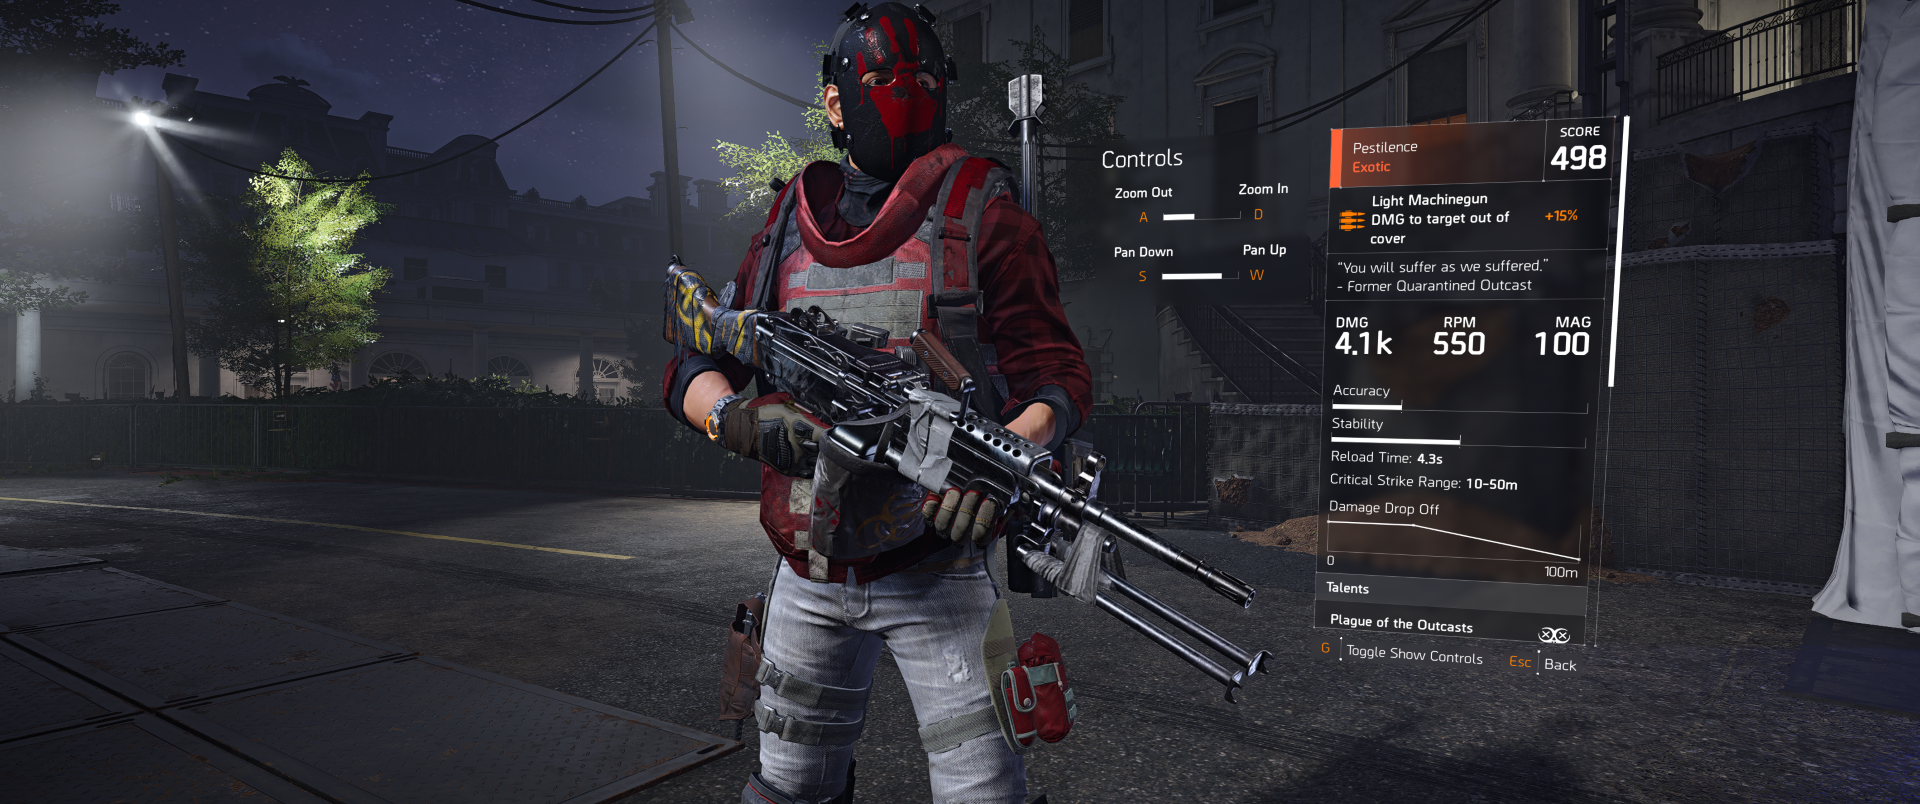 Tom Clancy's The Division 2 Screenshot 2019.04.08 - 22.35.46.82 (Large).png